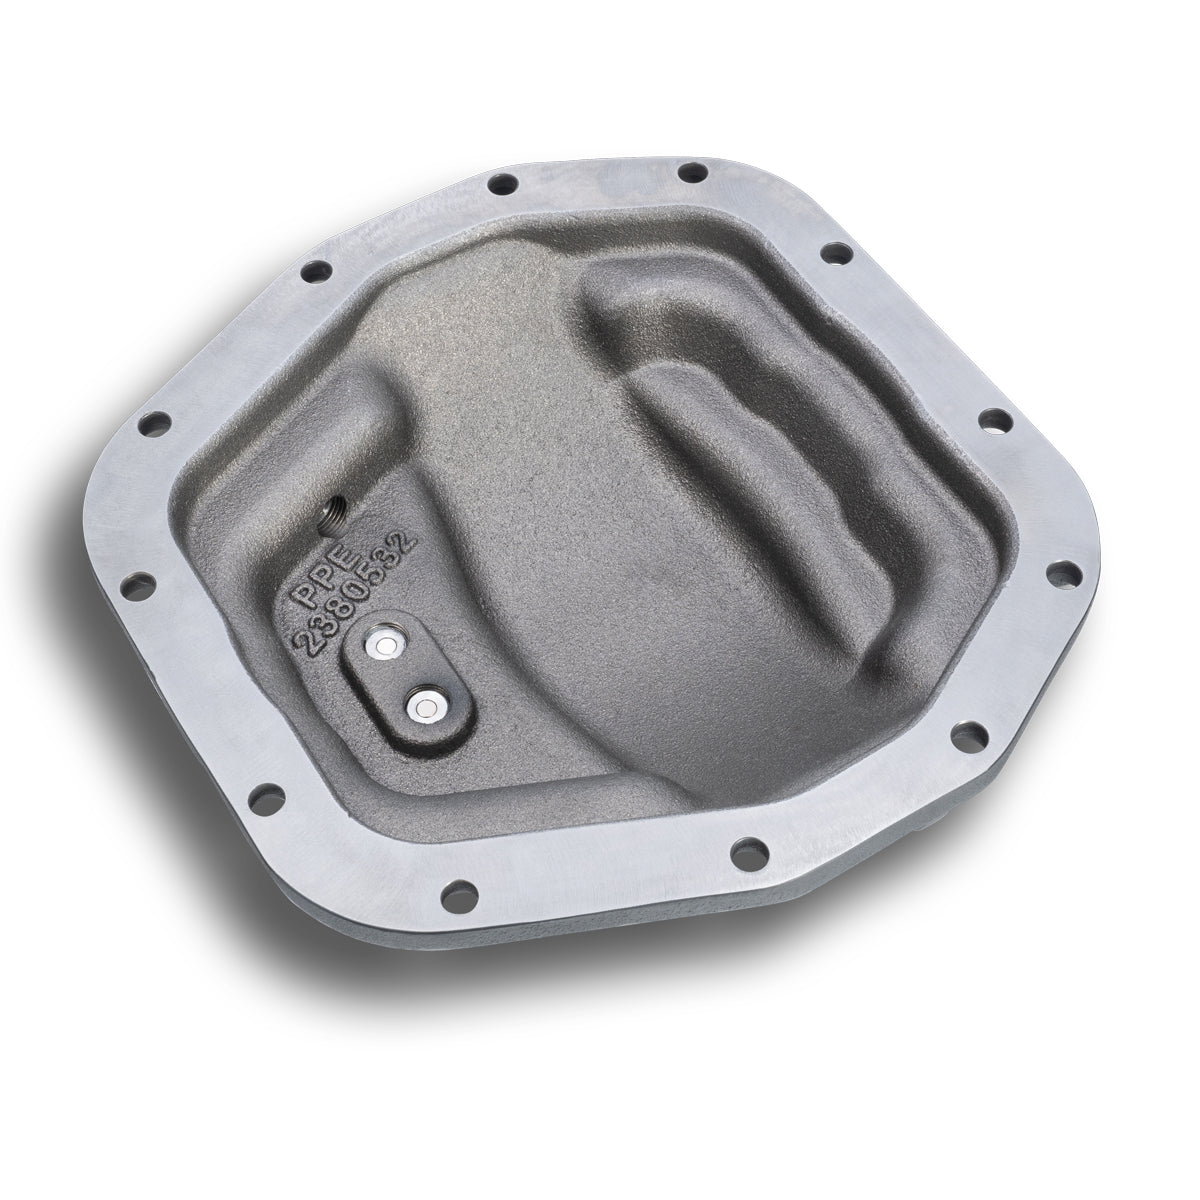 2018-2023 Jeep JL/JT/ 2020-2023 Ford Bronco Dana 44-M220 Heavy-Duty Nodular Iron Rear Differential Cover Pacific Performance Engineering